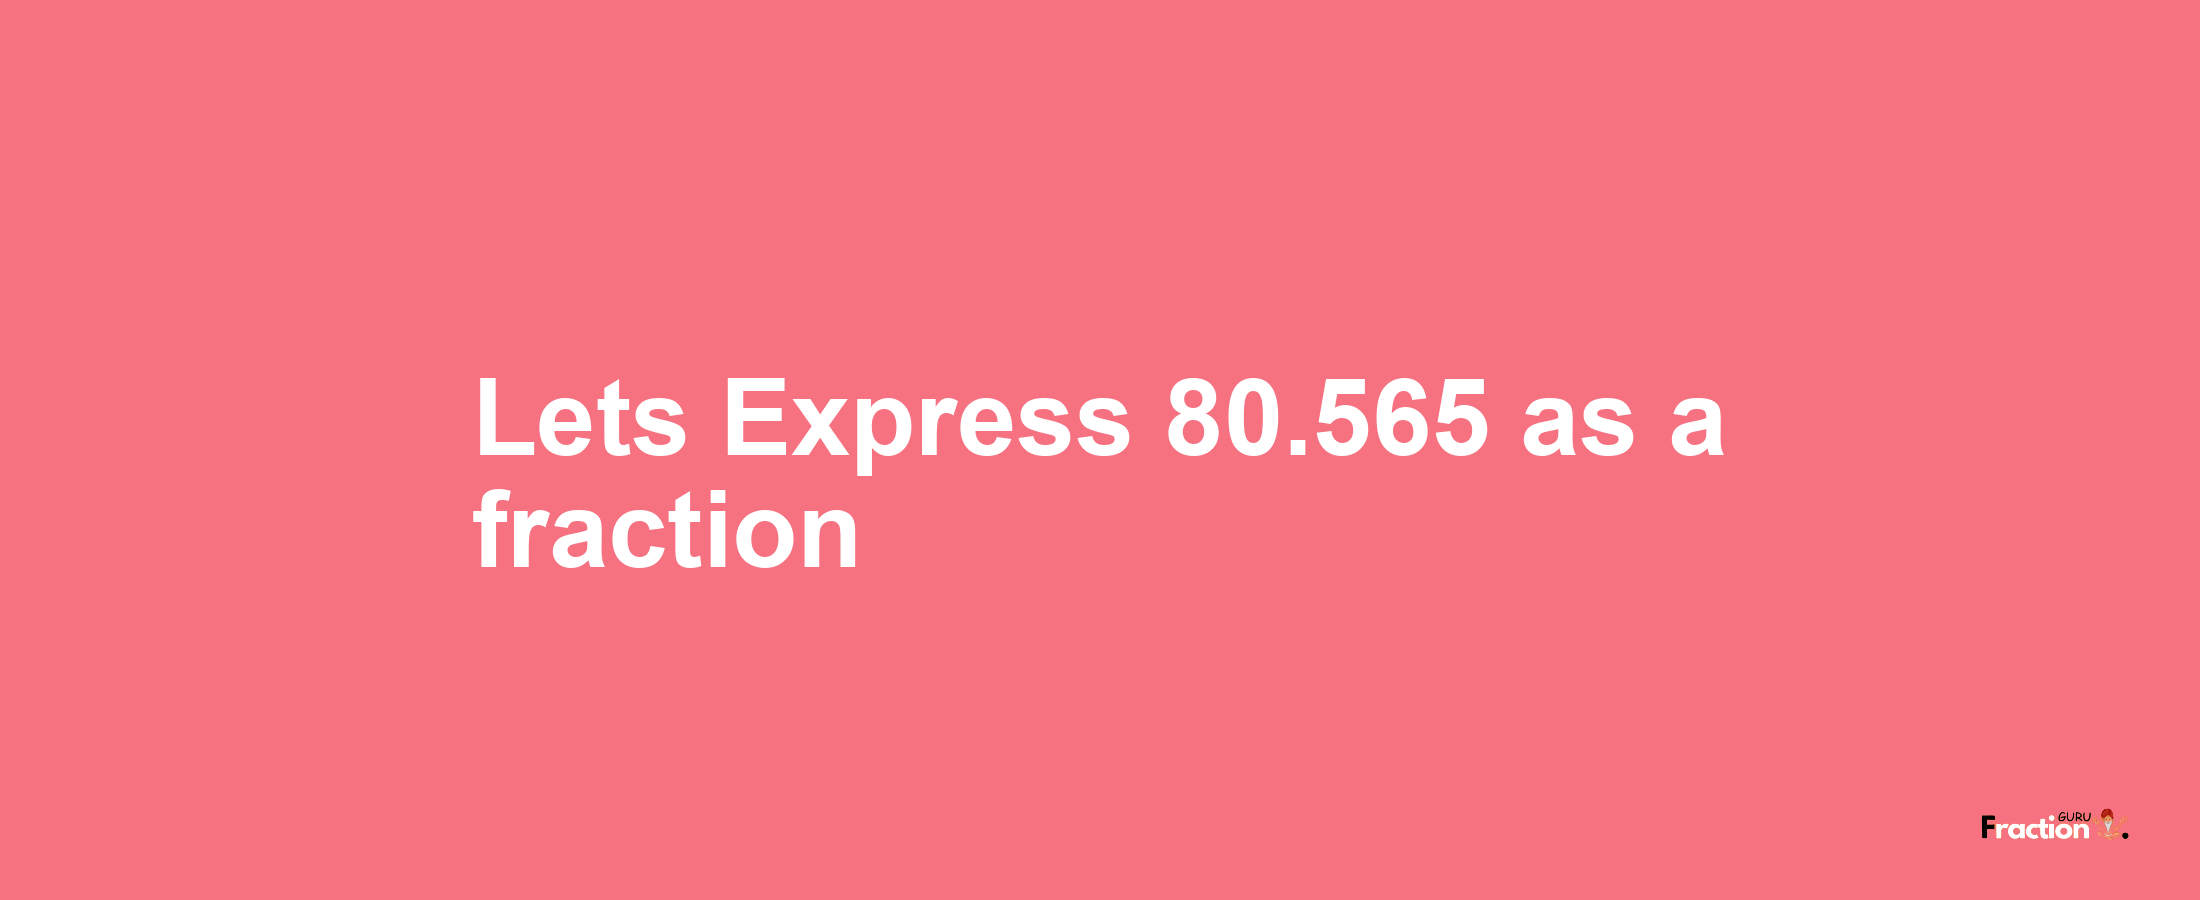 Lets Express 80.565 as afraction